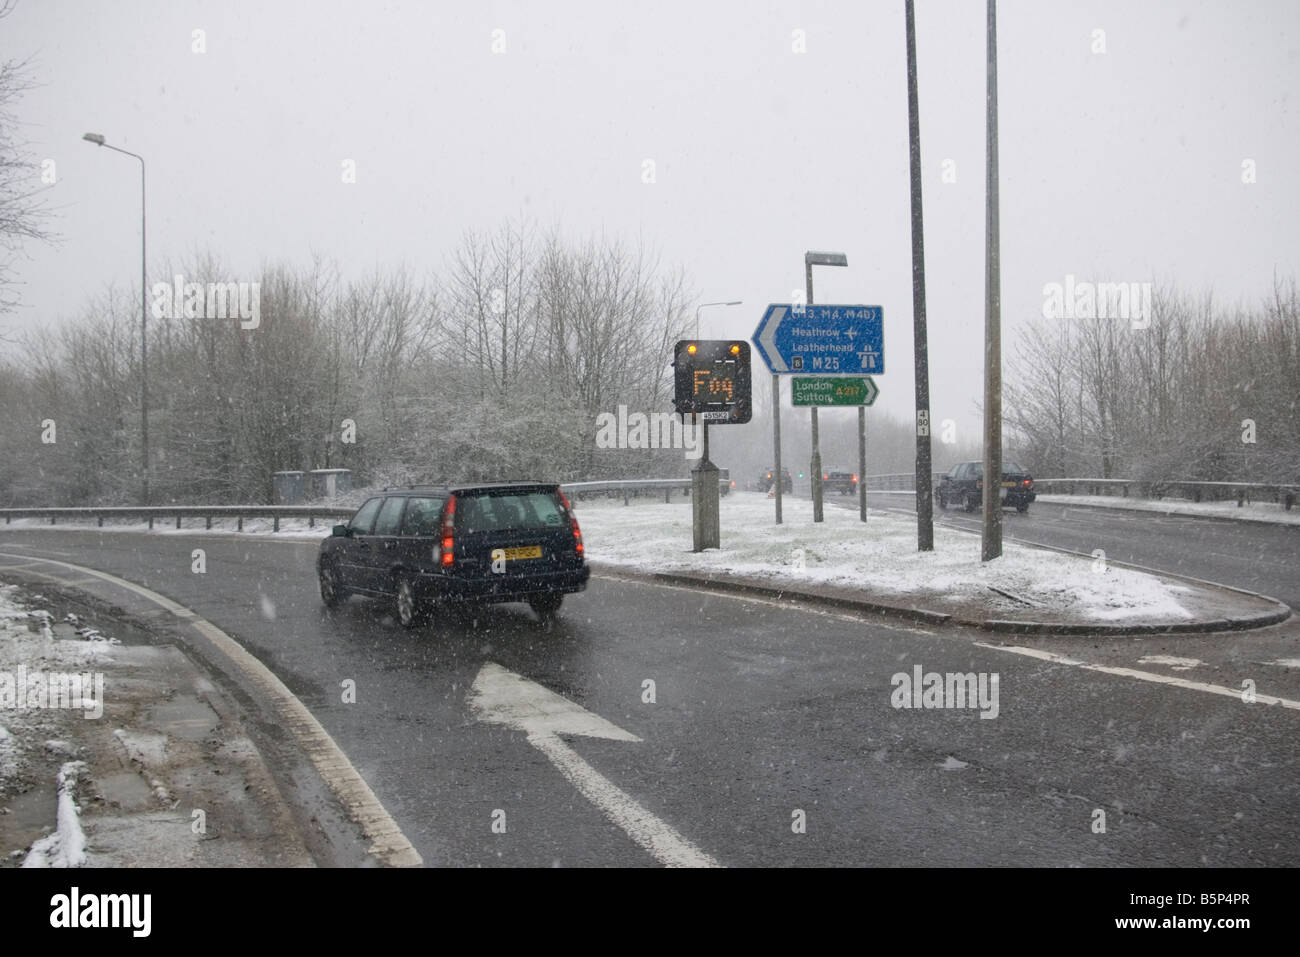 Car Driving In Sleet and Snow Bad Driving Conditions With A Fog Sign Displayed Stock Photo